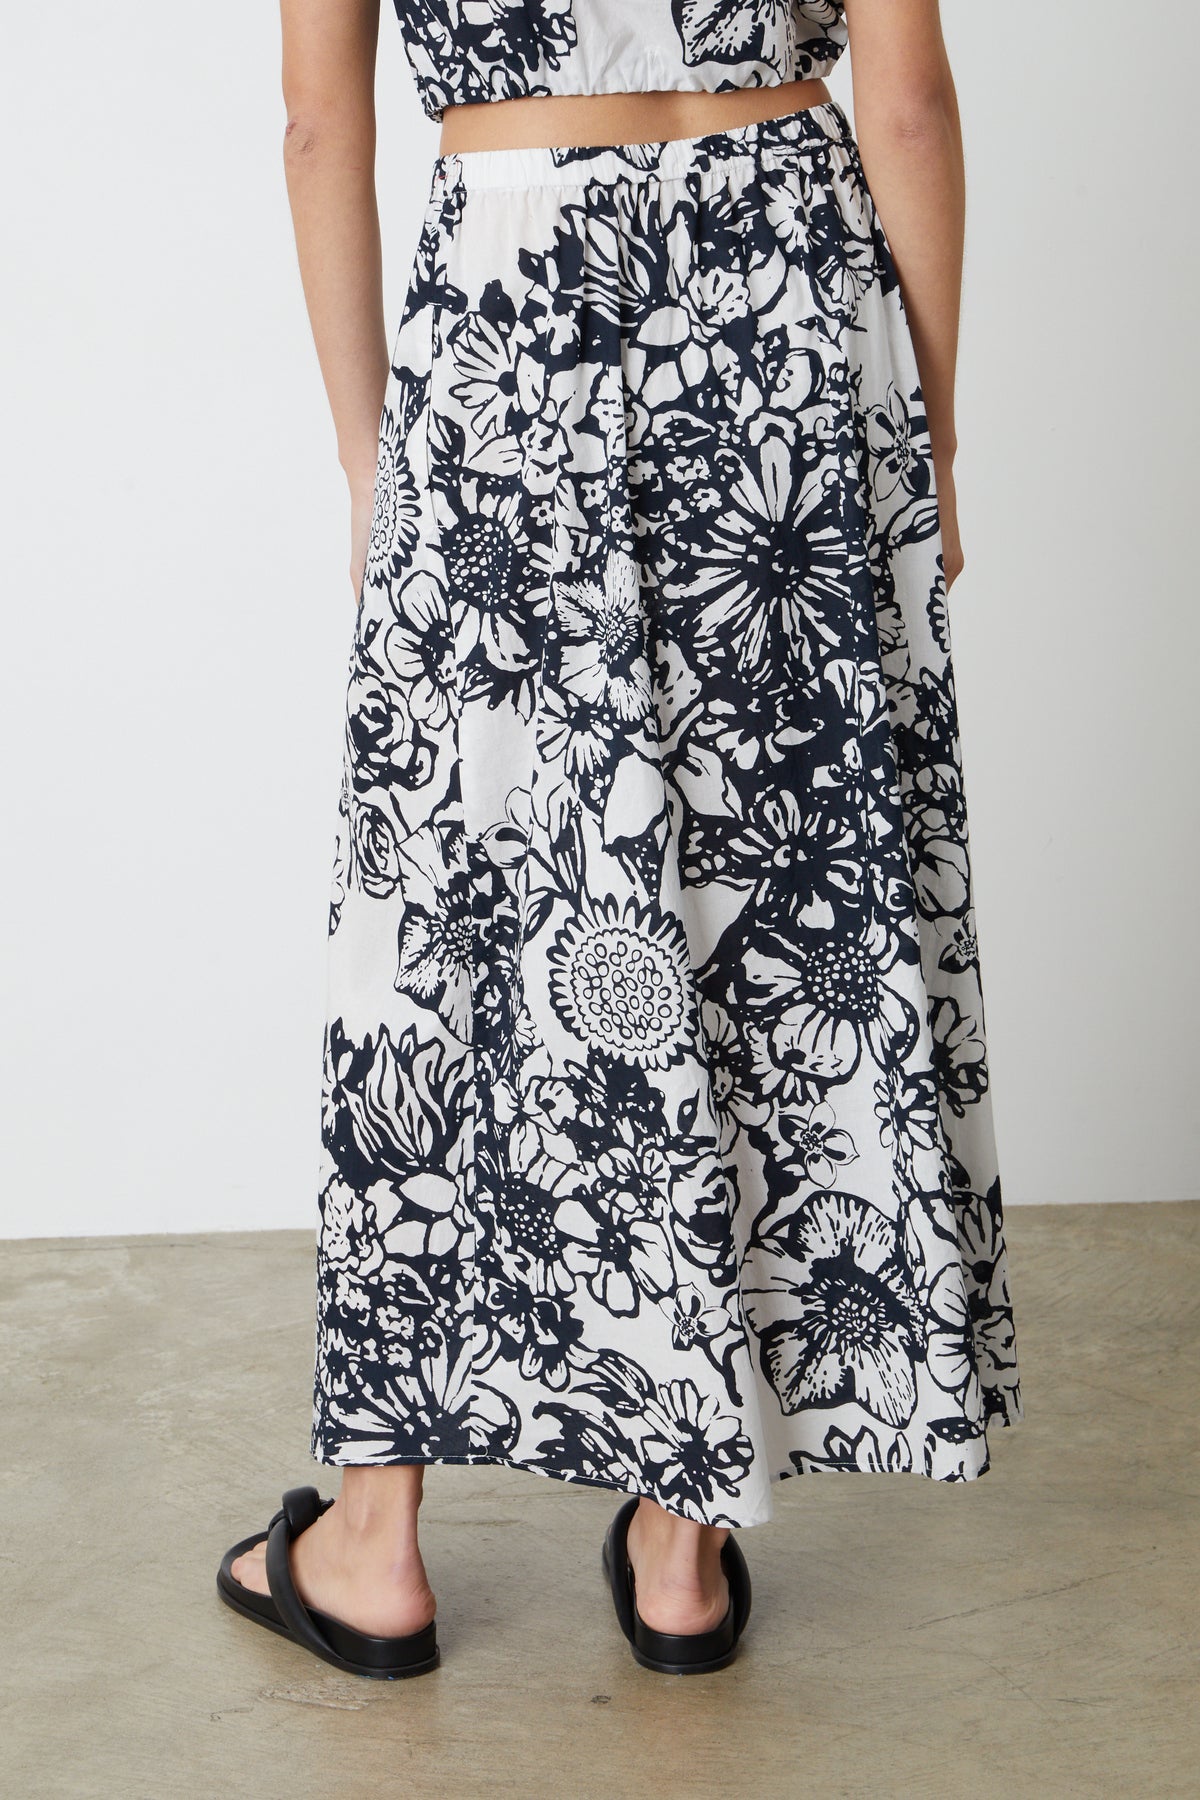 The back view of a person wearing a Velvet by Graham & Spencer Juliana Printed Maxi Skirt.-26793045786817